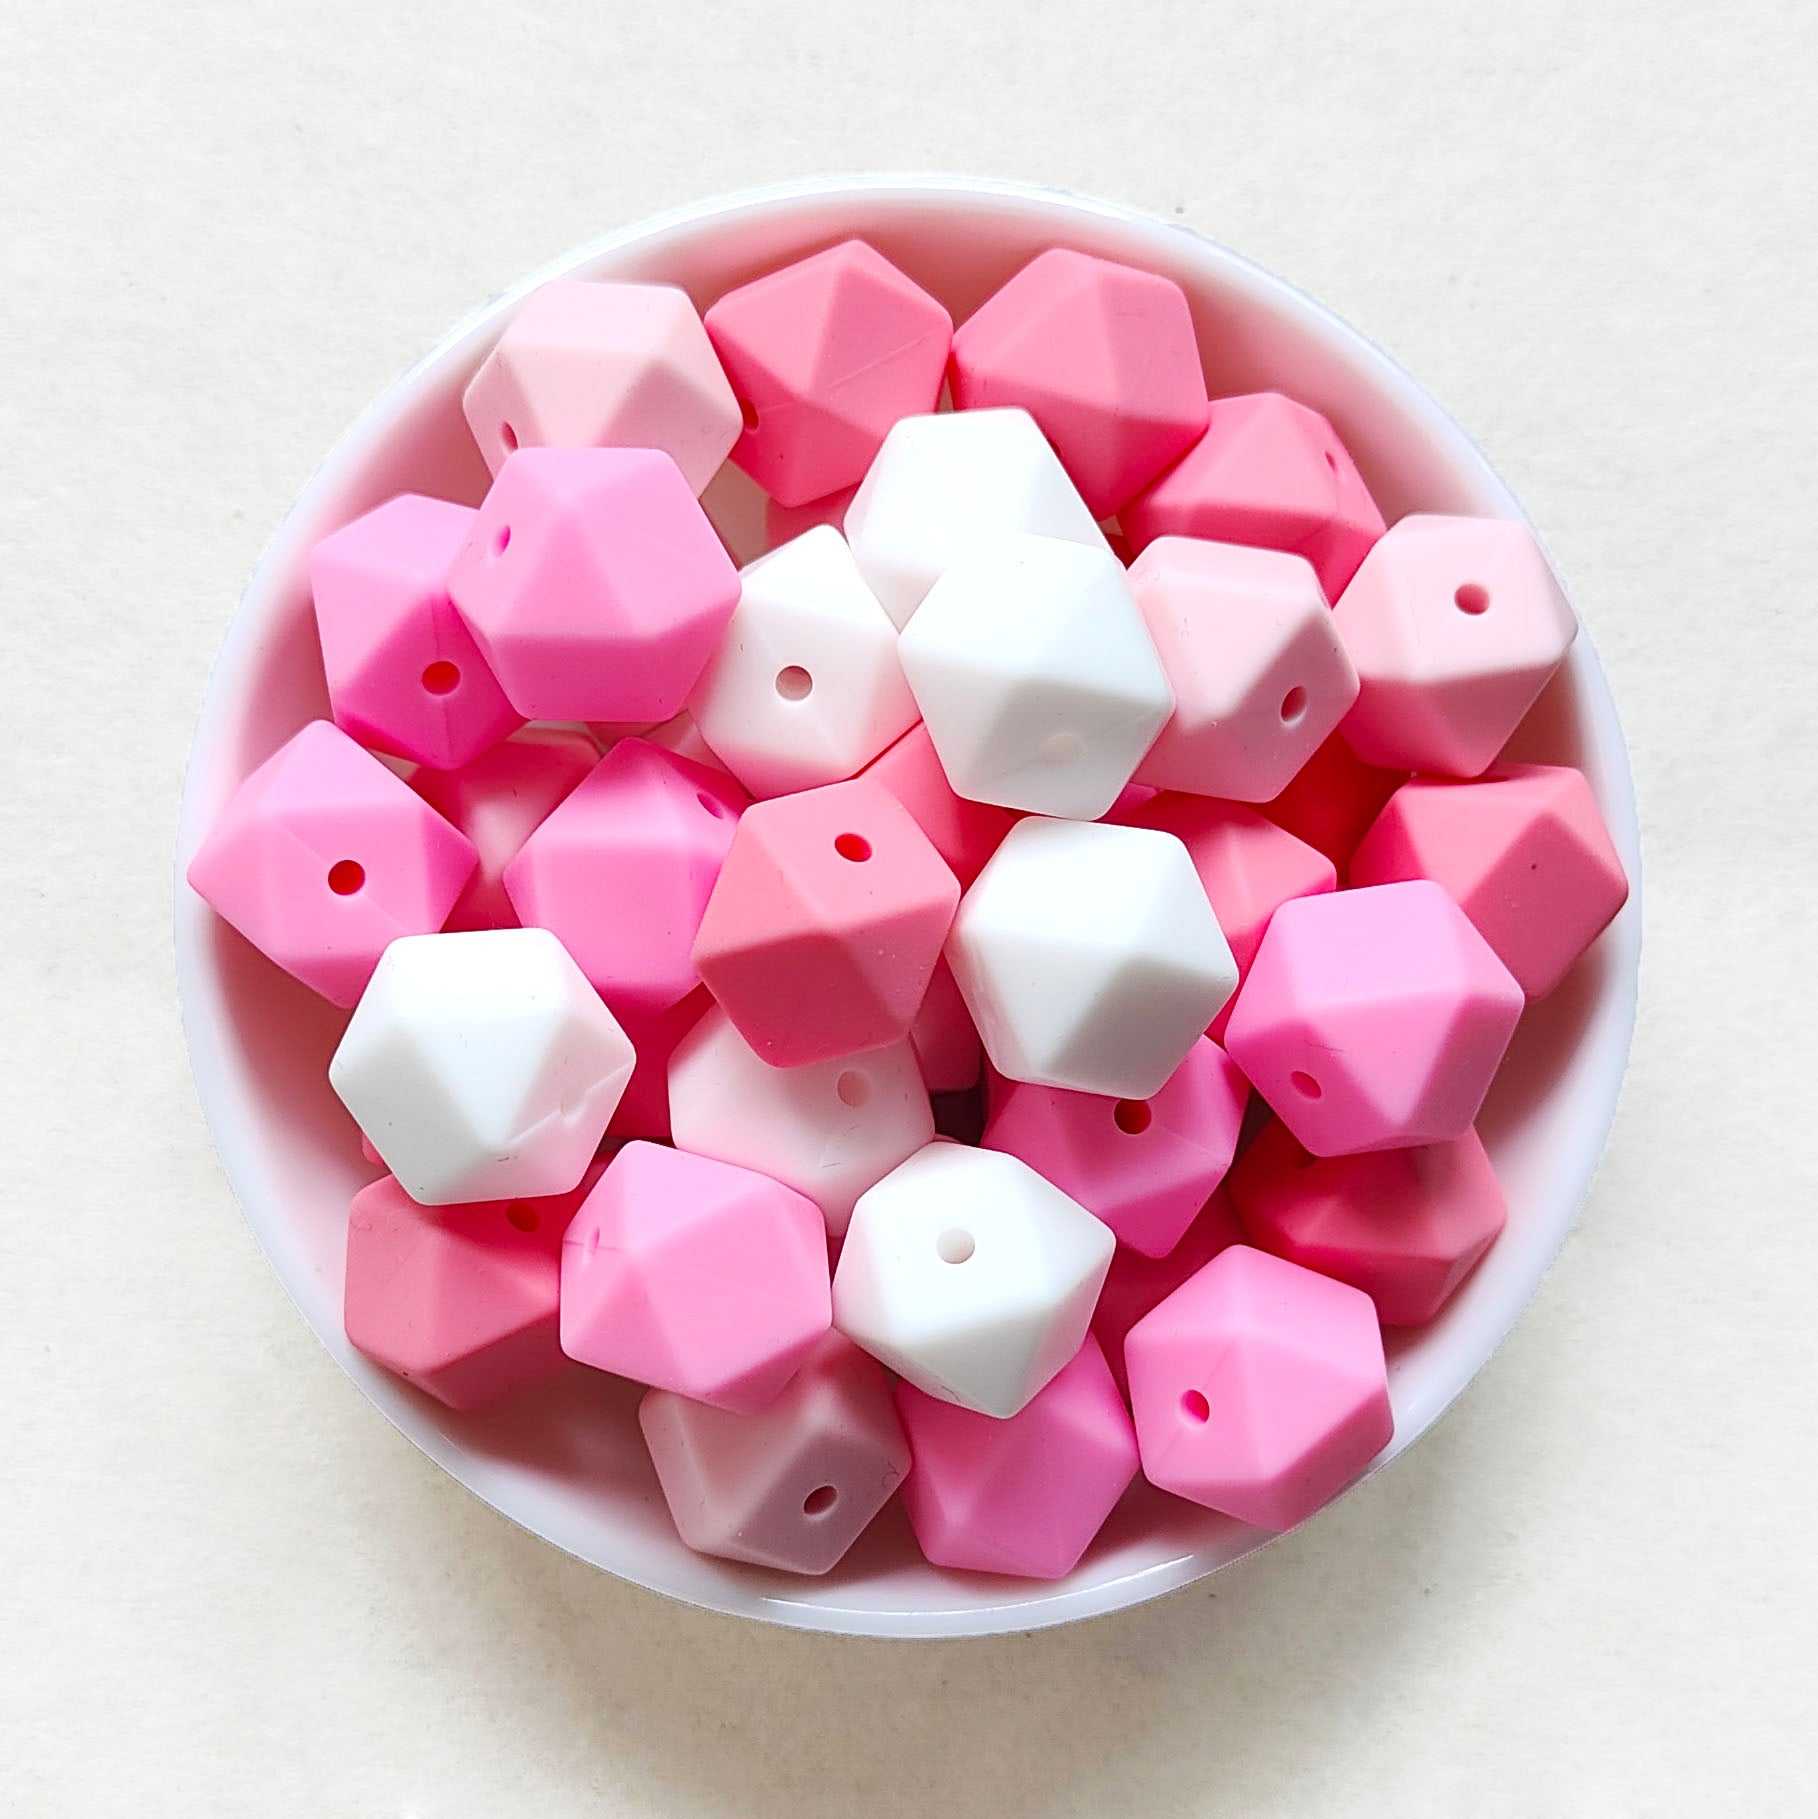 14mm Mix 4 Colors Hexagon Silicone Beads